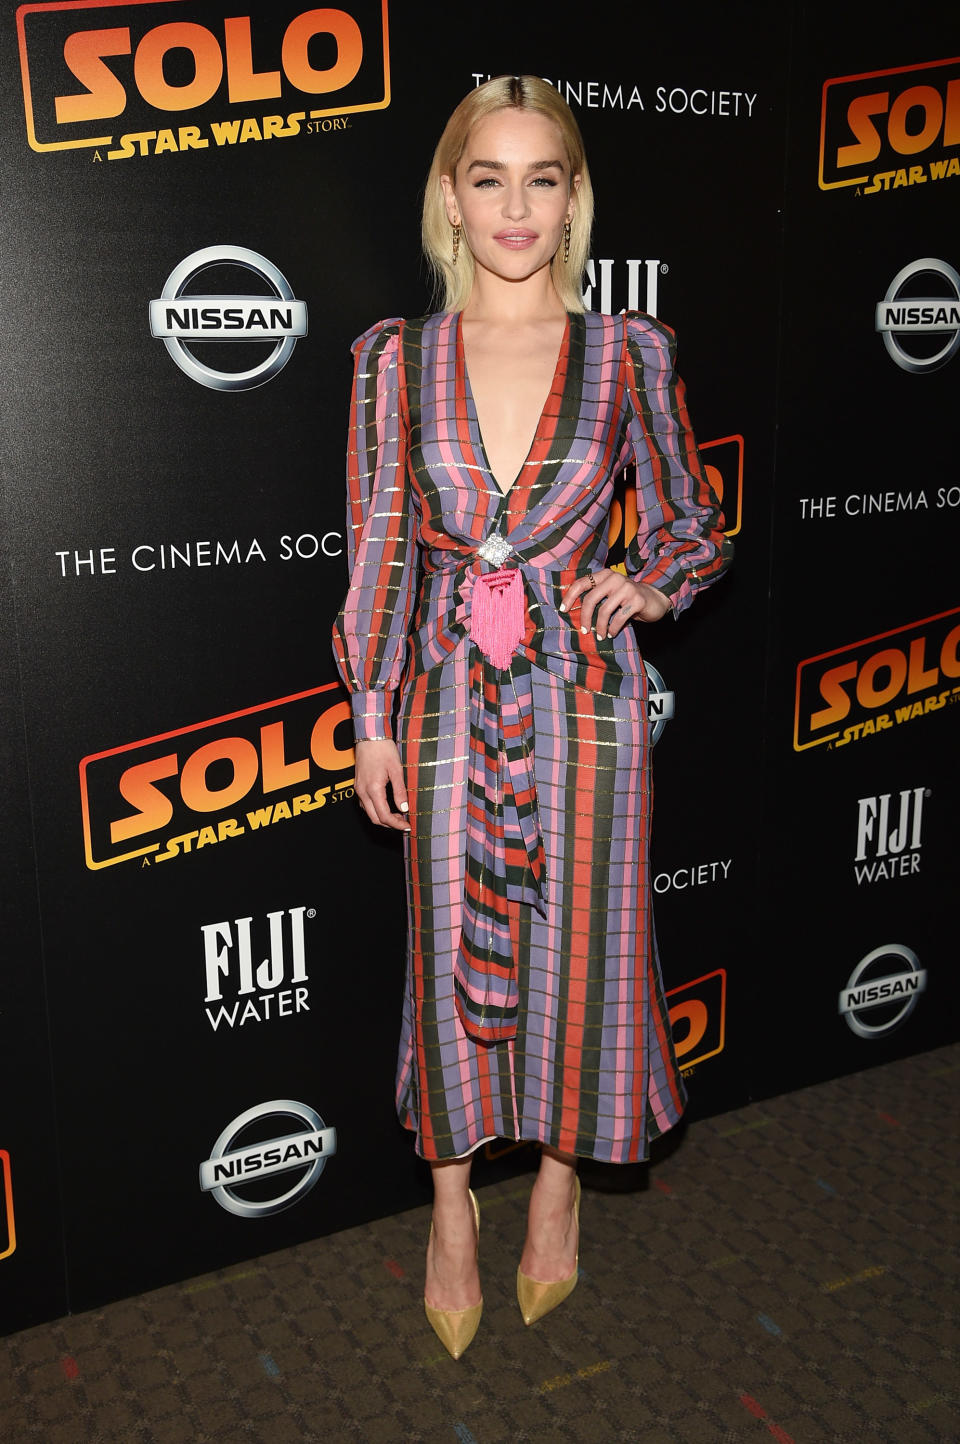 Emilia Clarke at at screening of Solo: A Star Wars Story